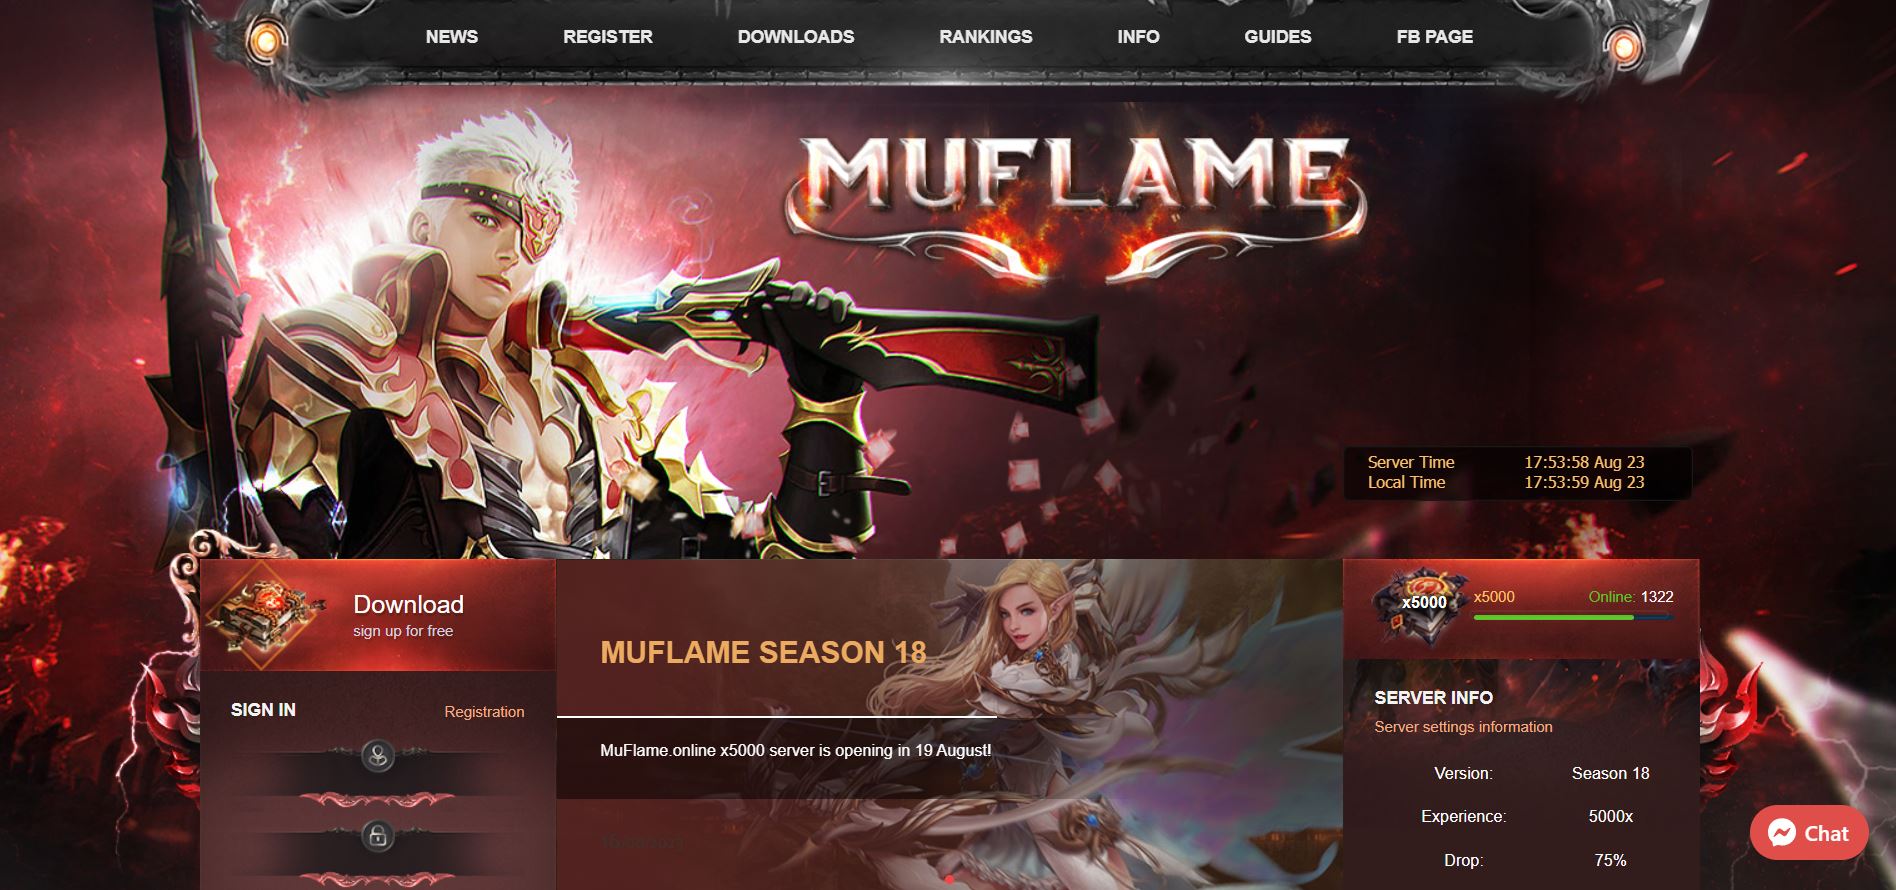 🔥 Ignite Your Passion in the World of Mu! Mu Online Season 18 x5000 at MuFlame: Blaze a Path to Legend! ⚔️🔥